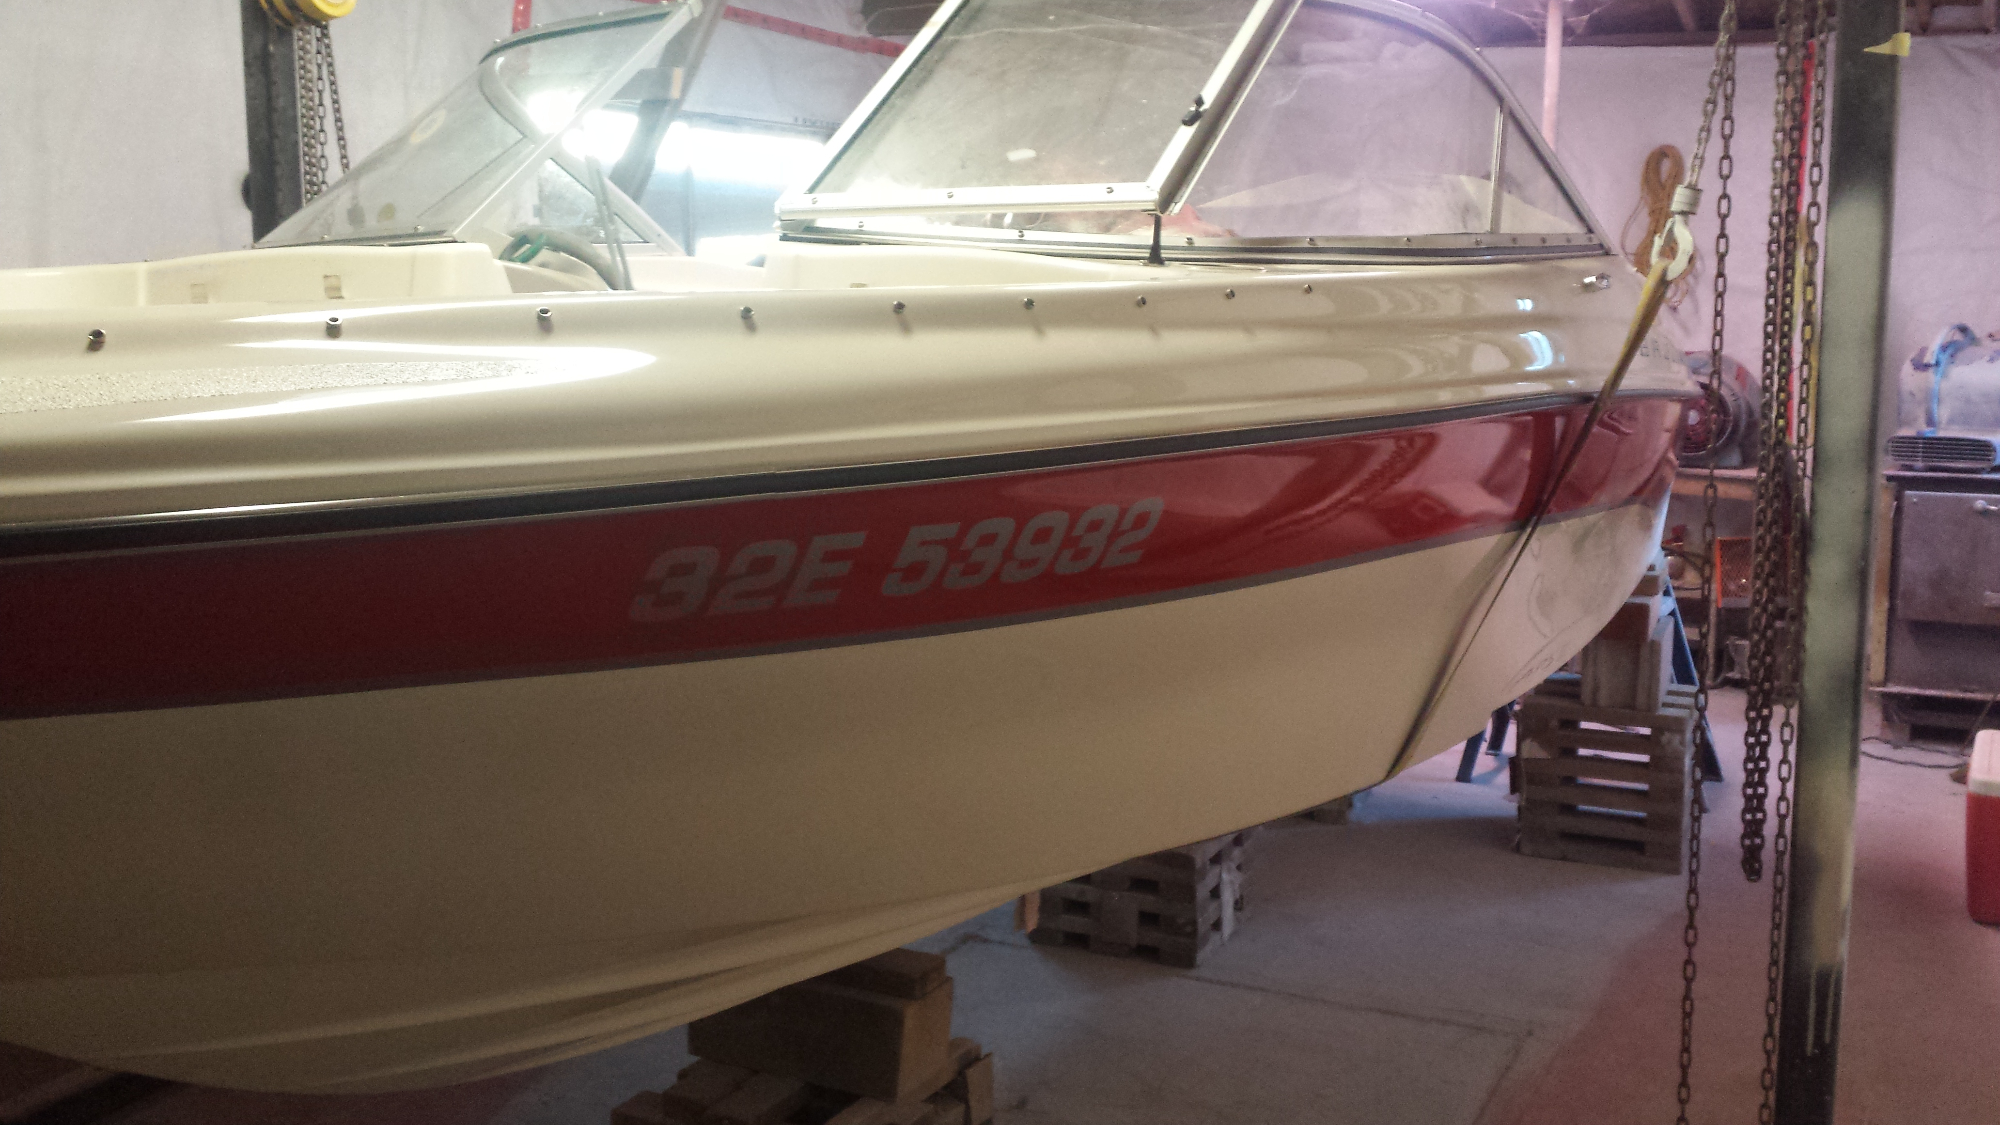 Boat insurance claim accident repairs including gel coat repairs, fiberglass repairs, new rub rail and hull stripe painting for a Pitt Meadows / Maple Ridge BC customer by MRV Marine Services.